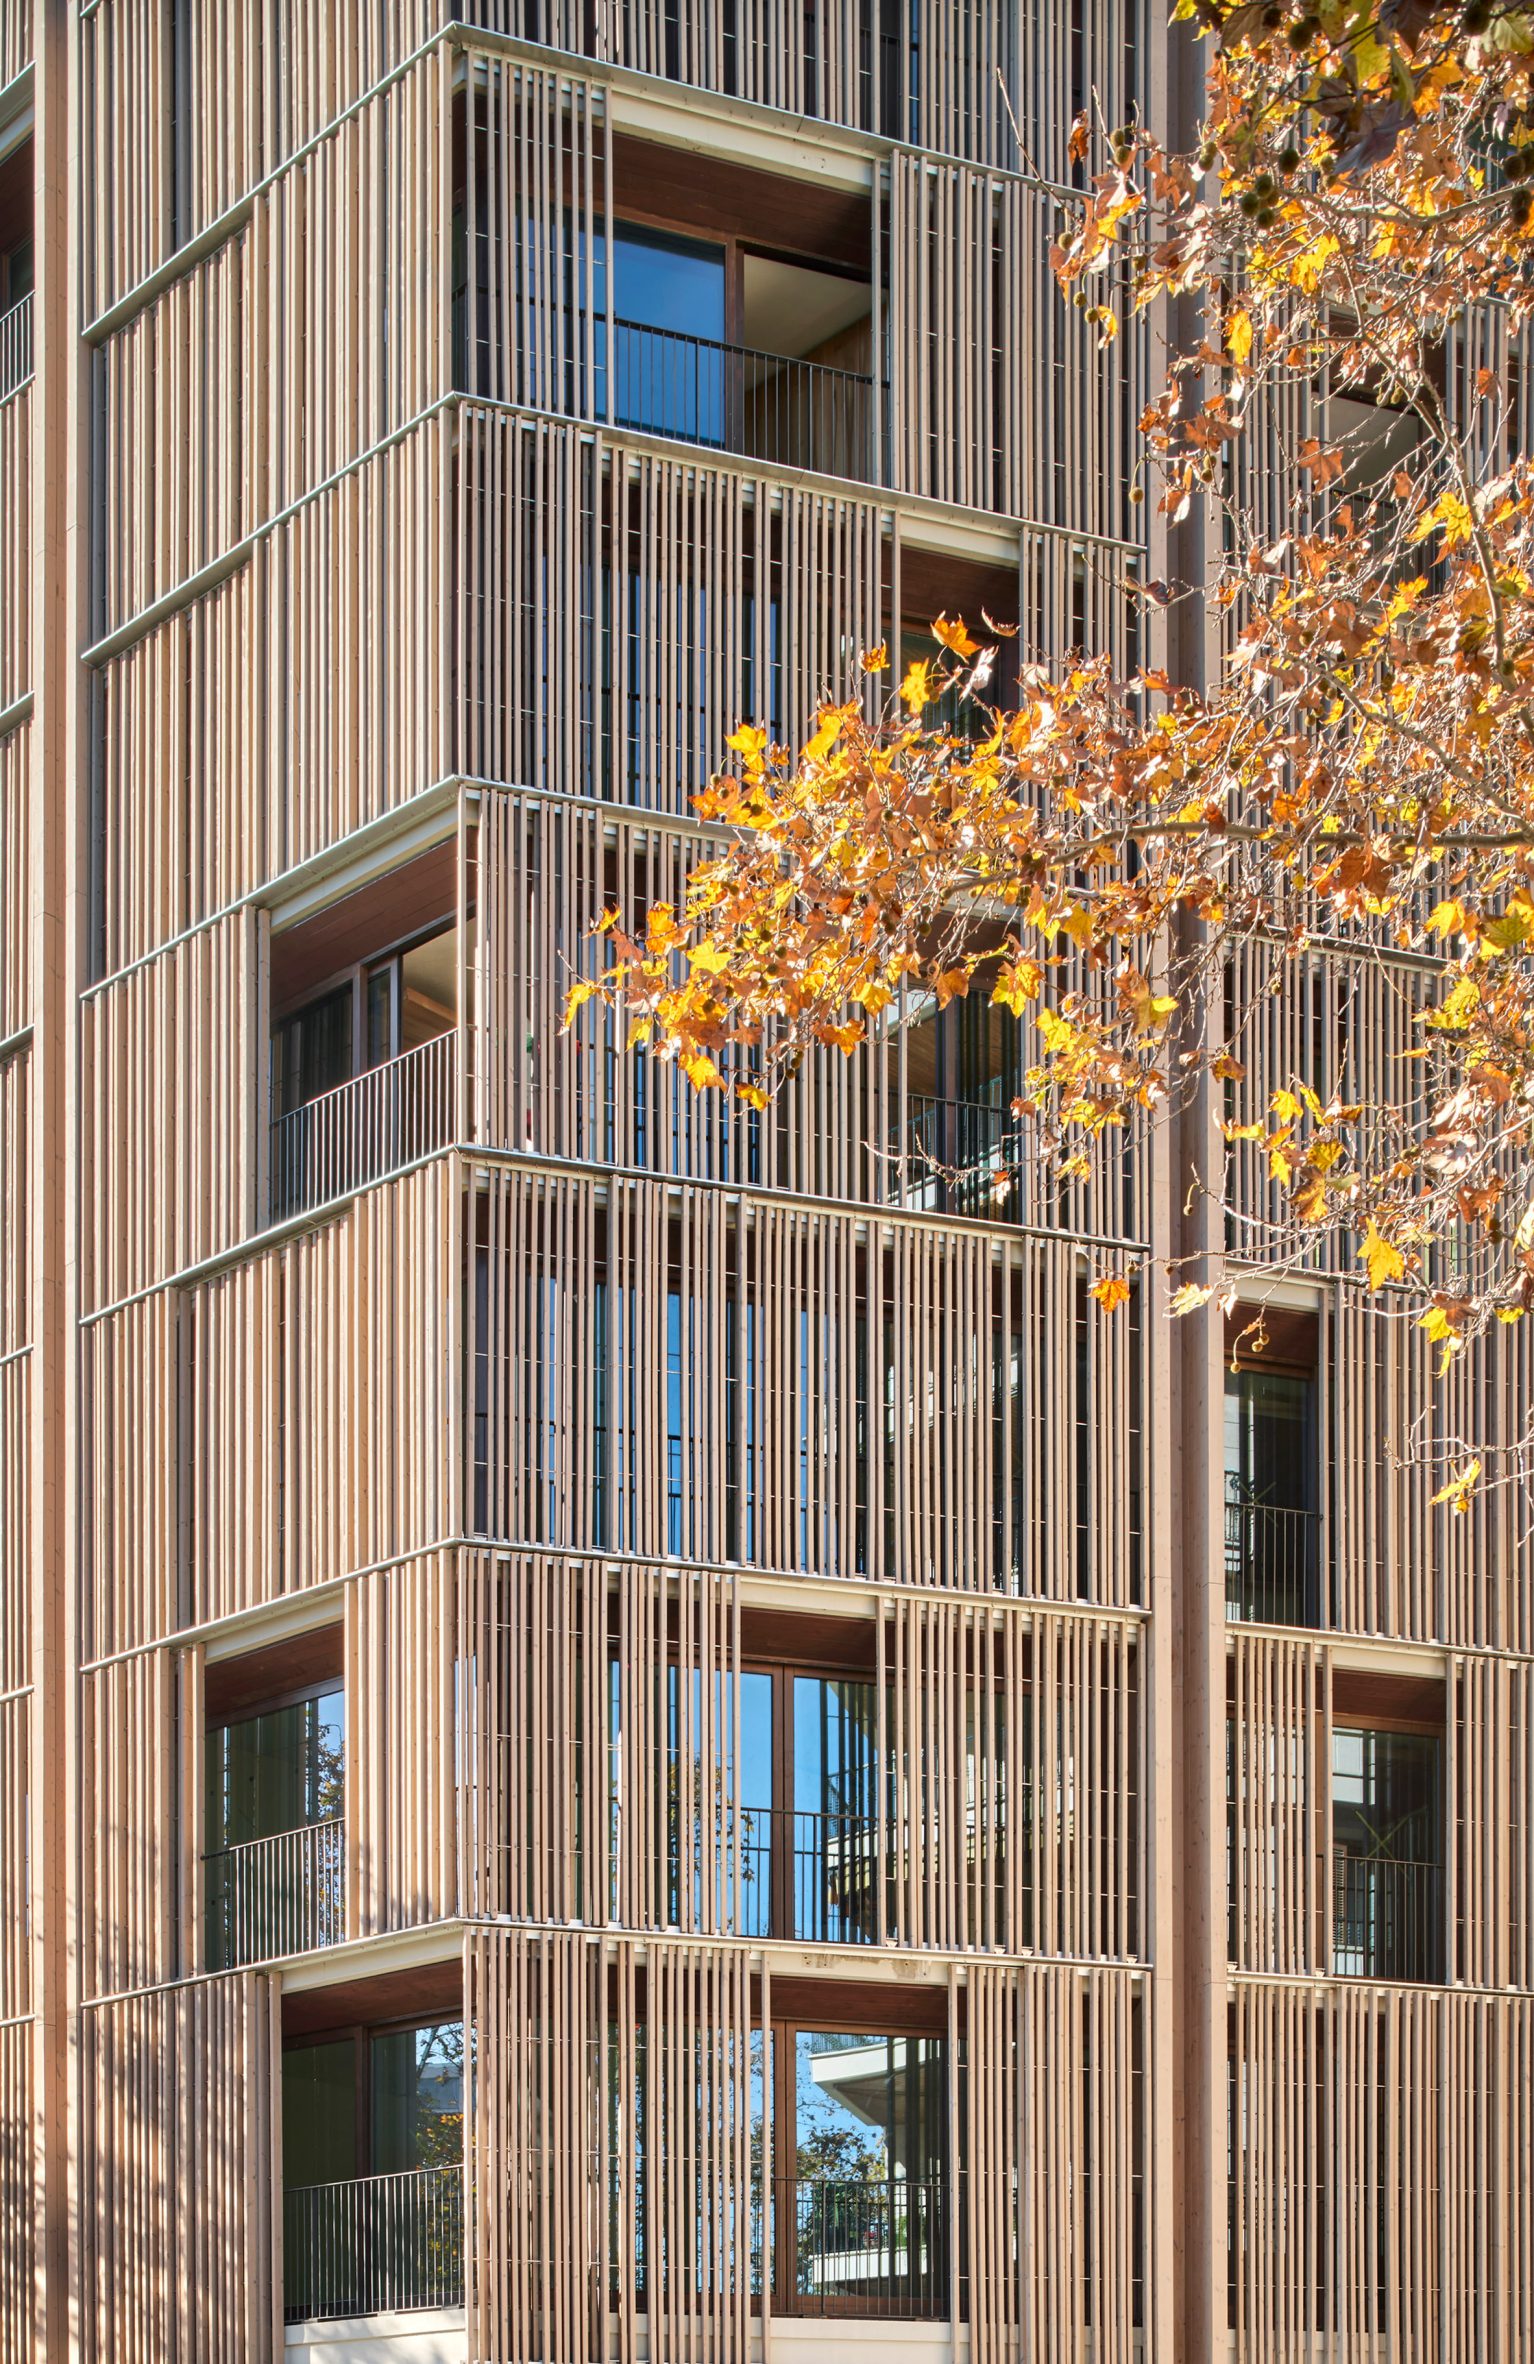 Detail image of the wooden screens across the facade of the Paseo Mallorca apartment block